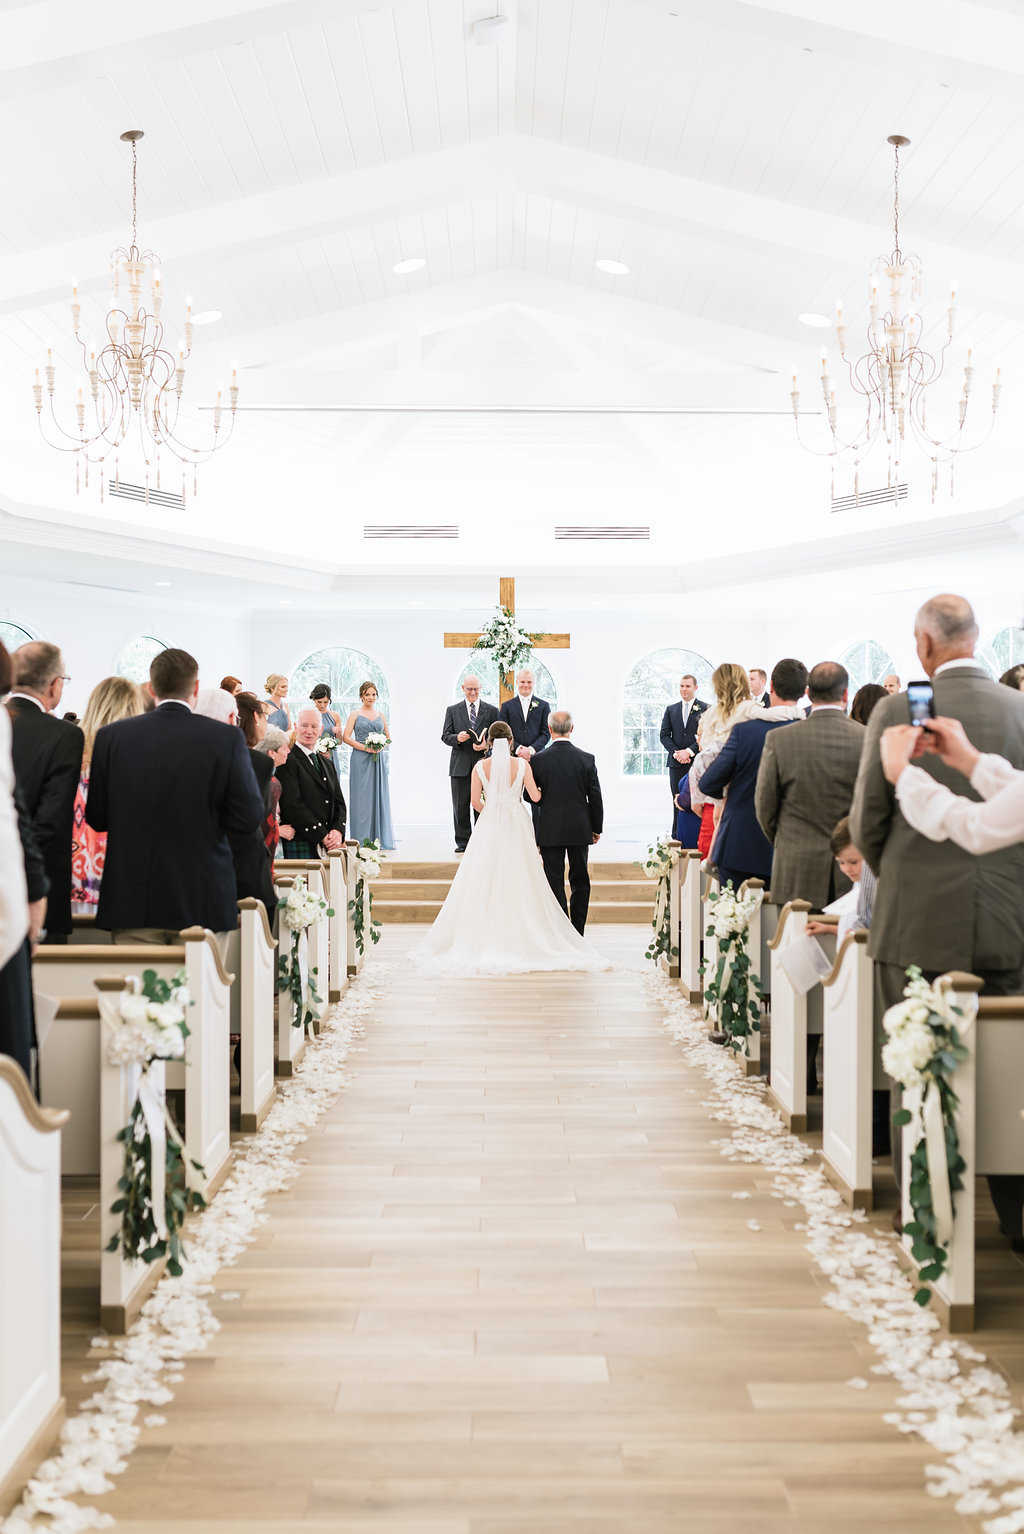 Wedding Ceremony Portrait of Bride, Groom and Father of the Bride at Altar | Clearwater Wedding Ceremony Venue Harborside Chapel